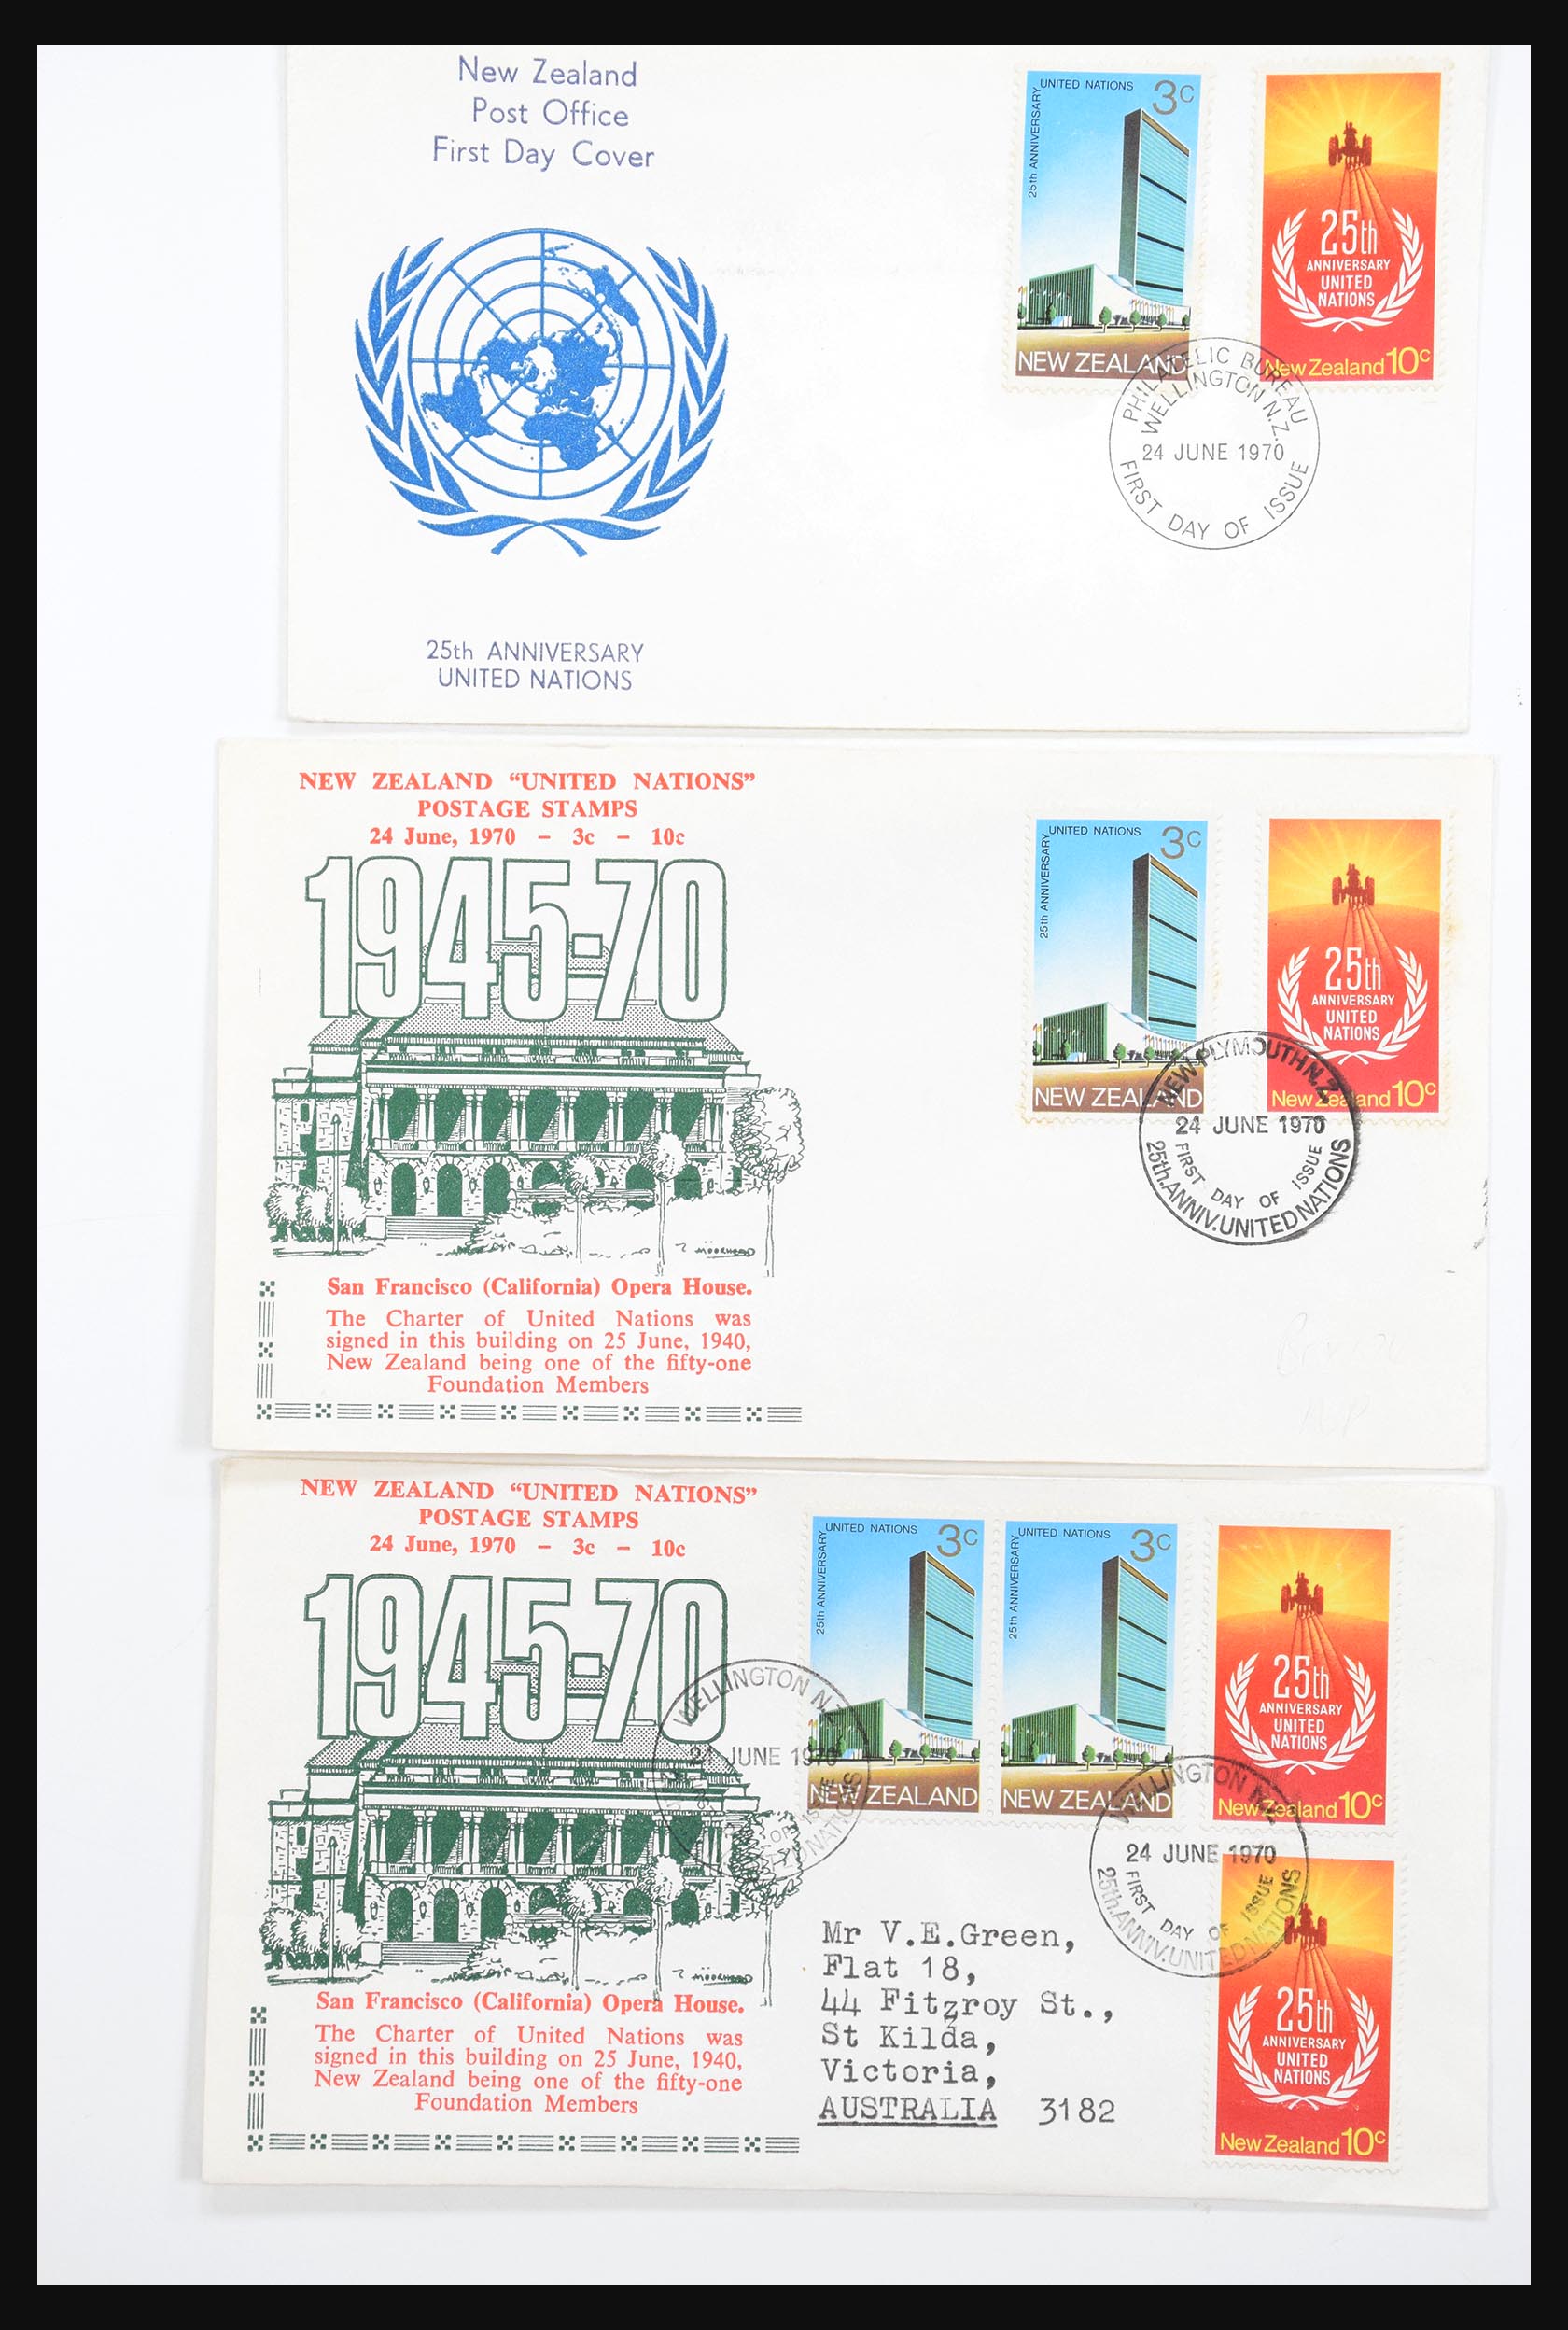 30821 273 - 30821 New Zealand FDC's 1960-1971.